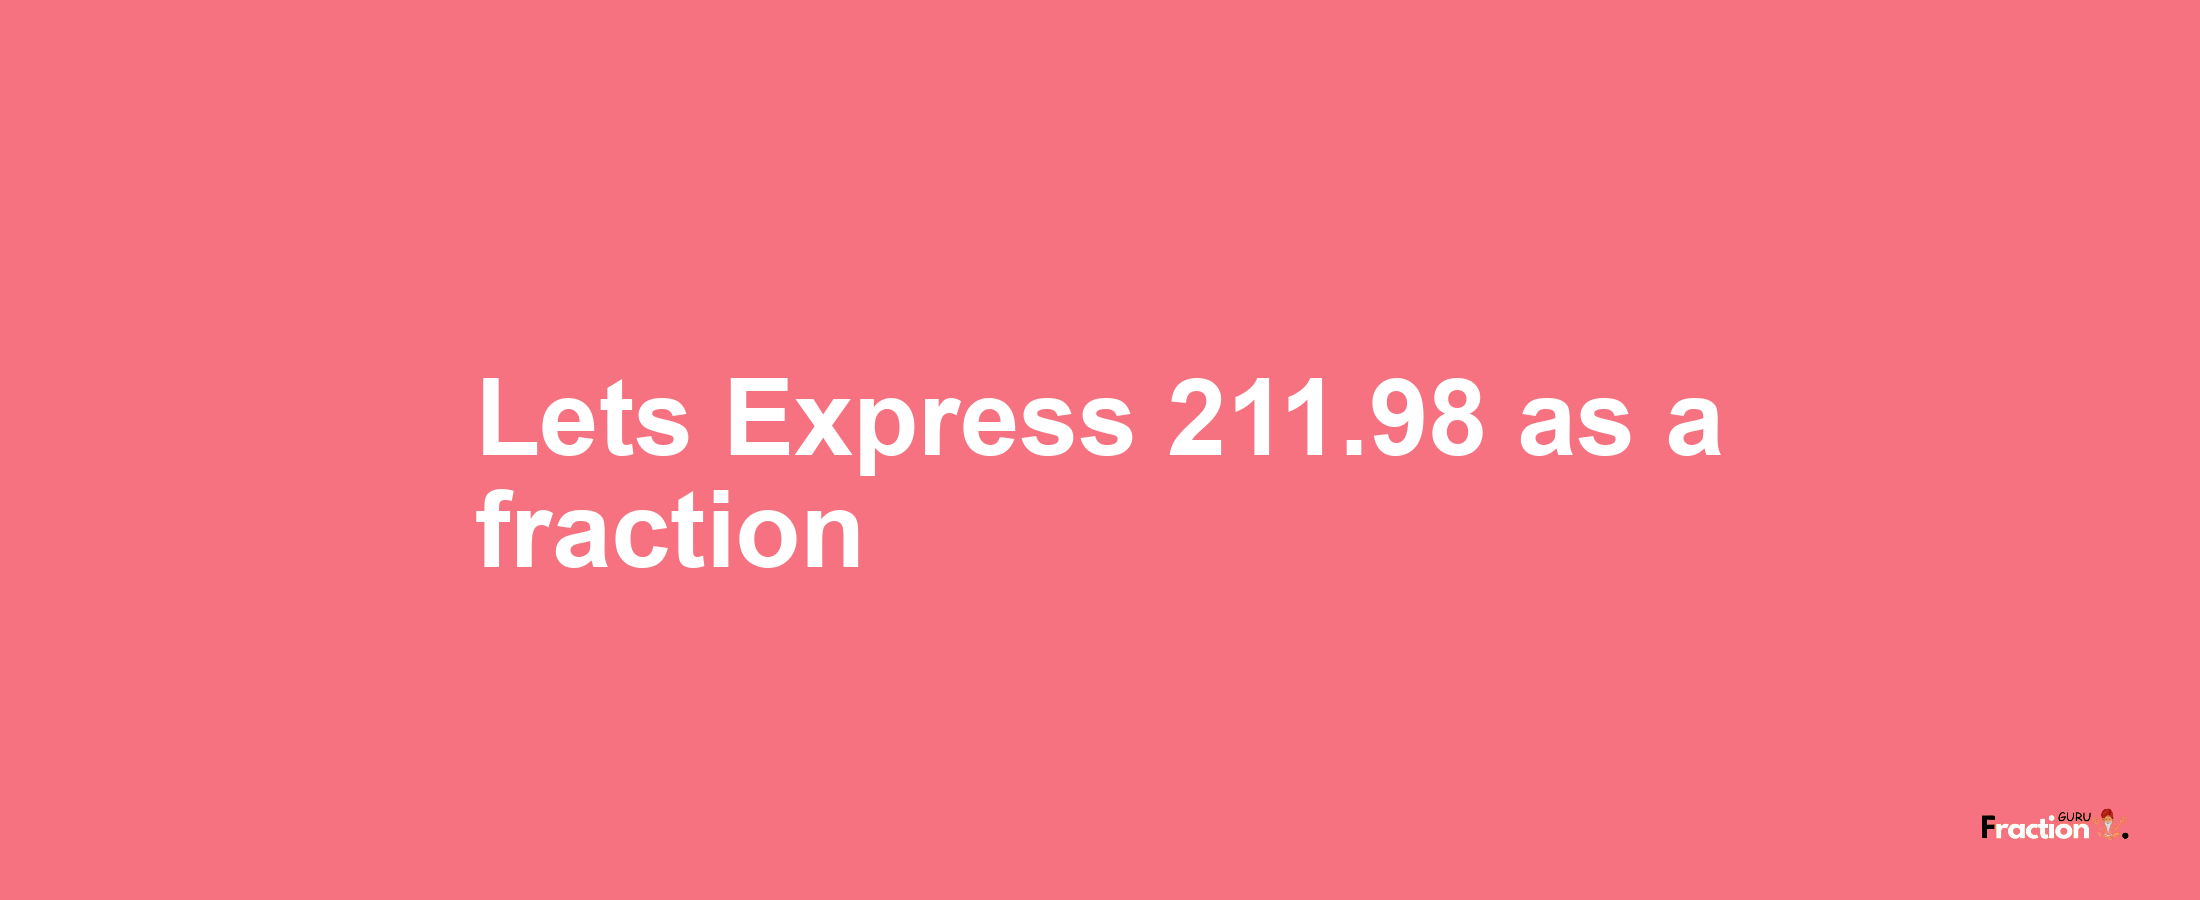 Lets Express 211.98 as afraction